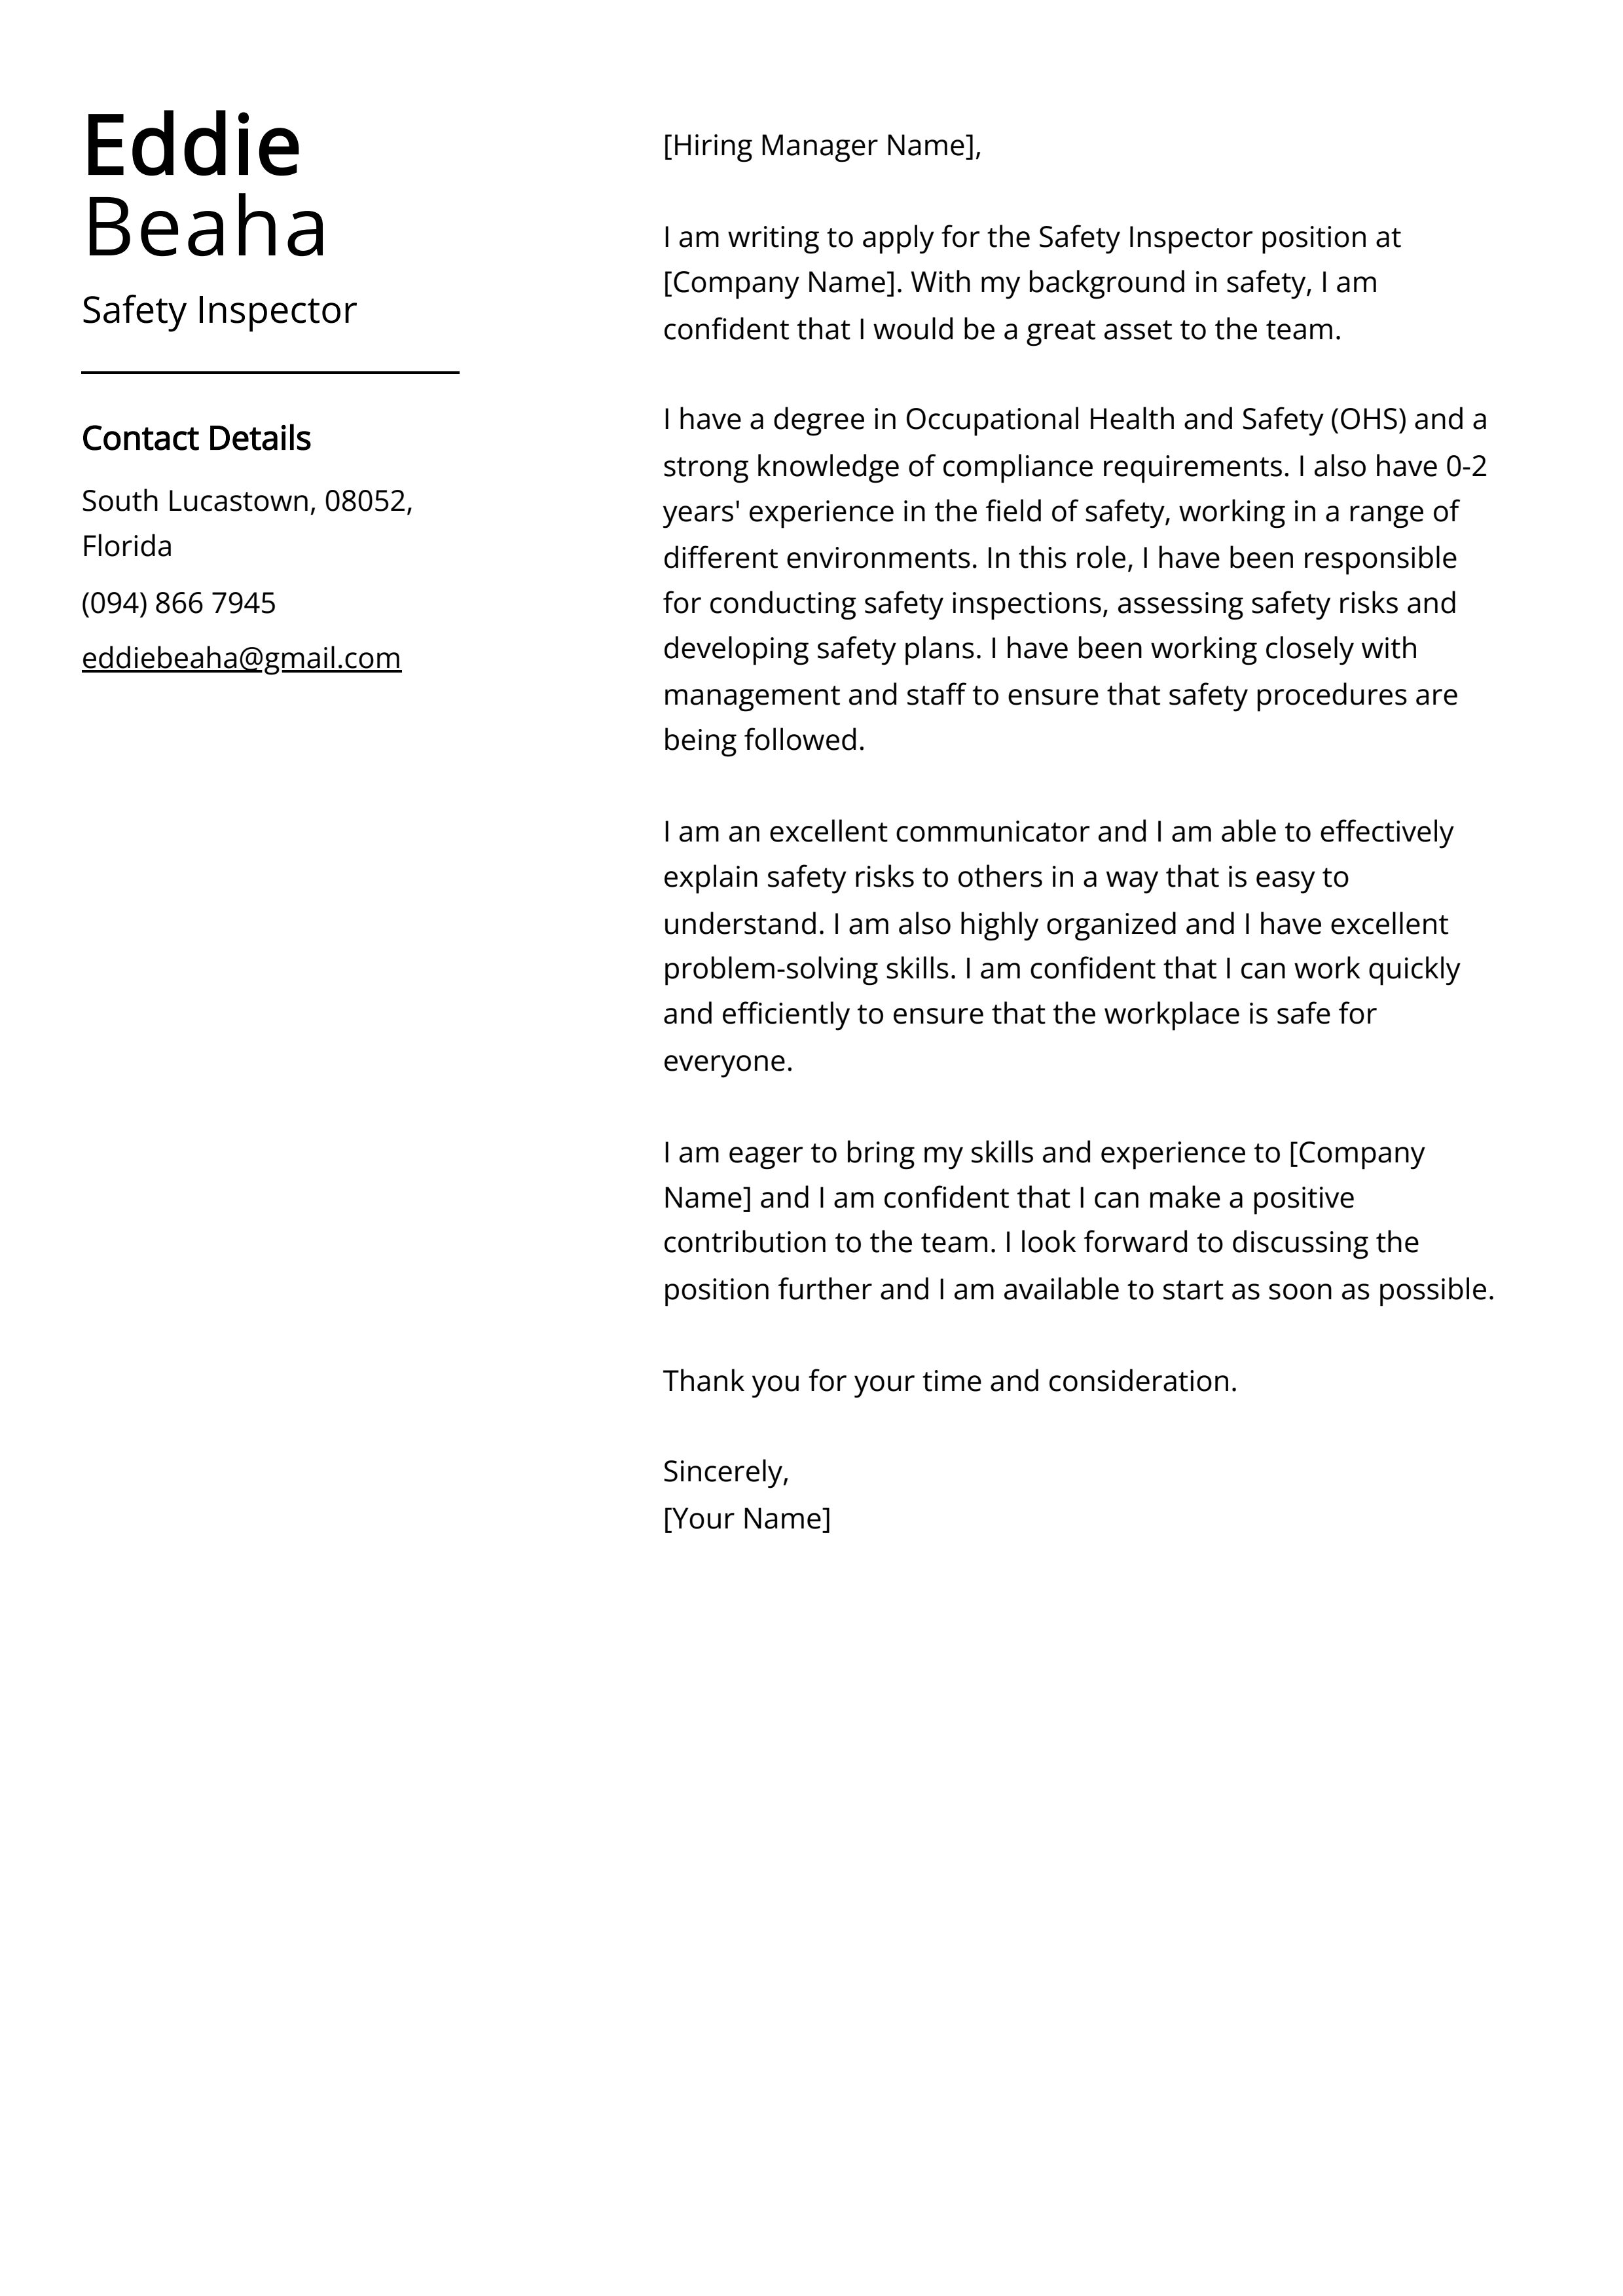 Safety Inspector Cover Letter Example